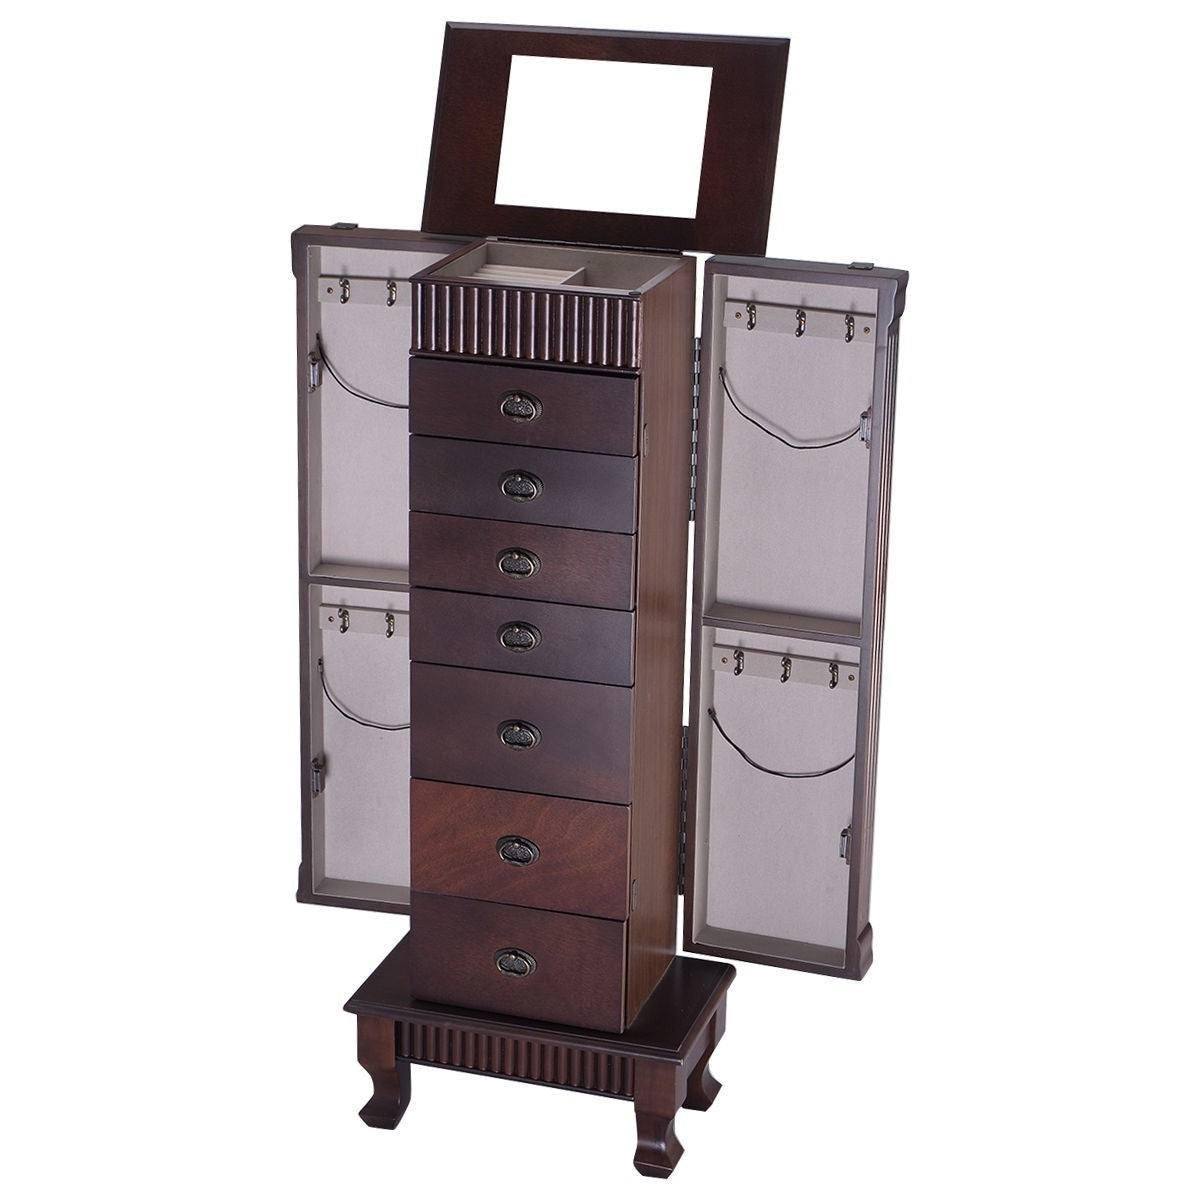 Accents > Jewelry Armoires & Boxes - Classic 7-Drawer Jewelry Armoire Wood Storage Chest Cabinet